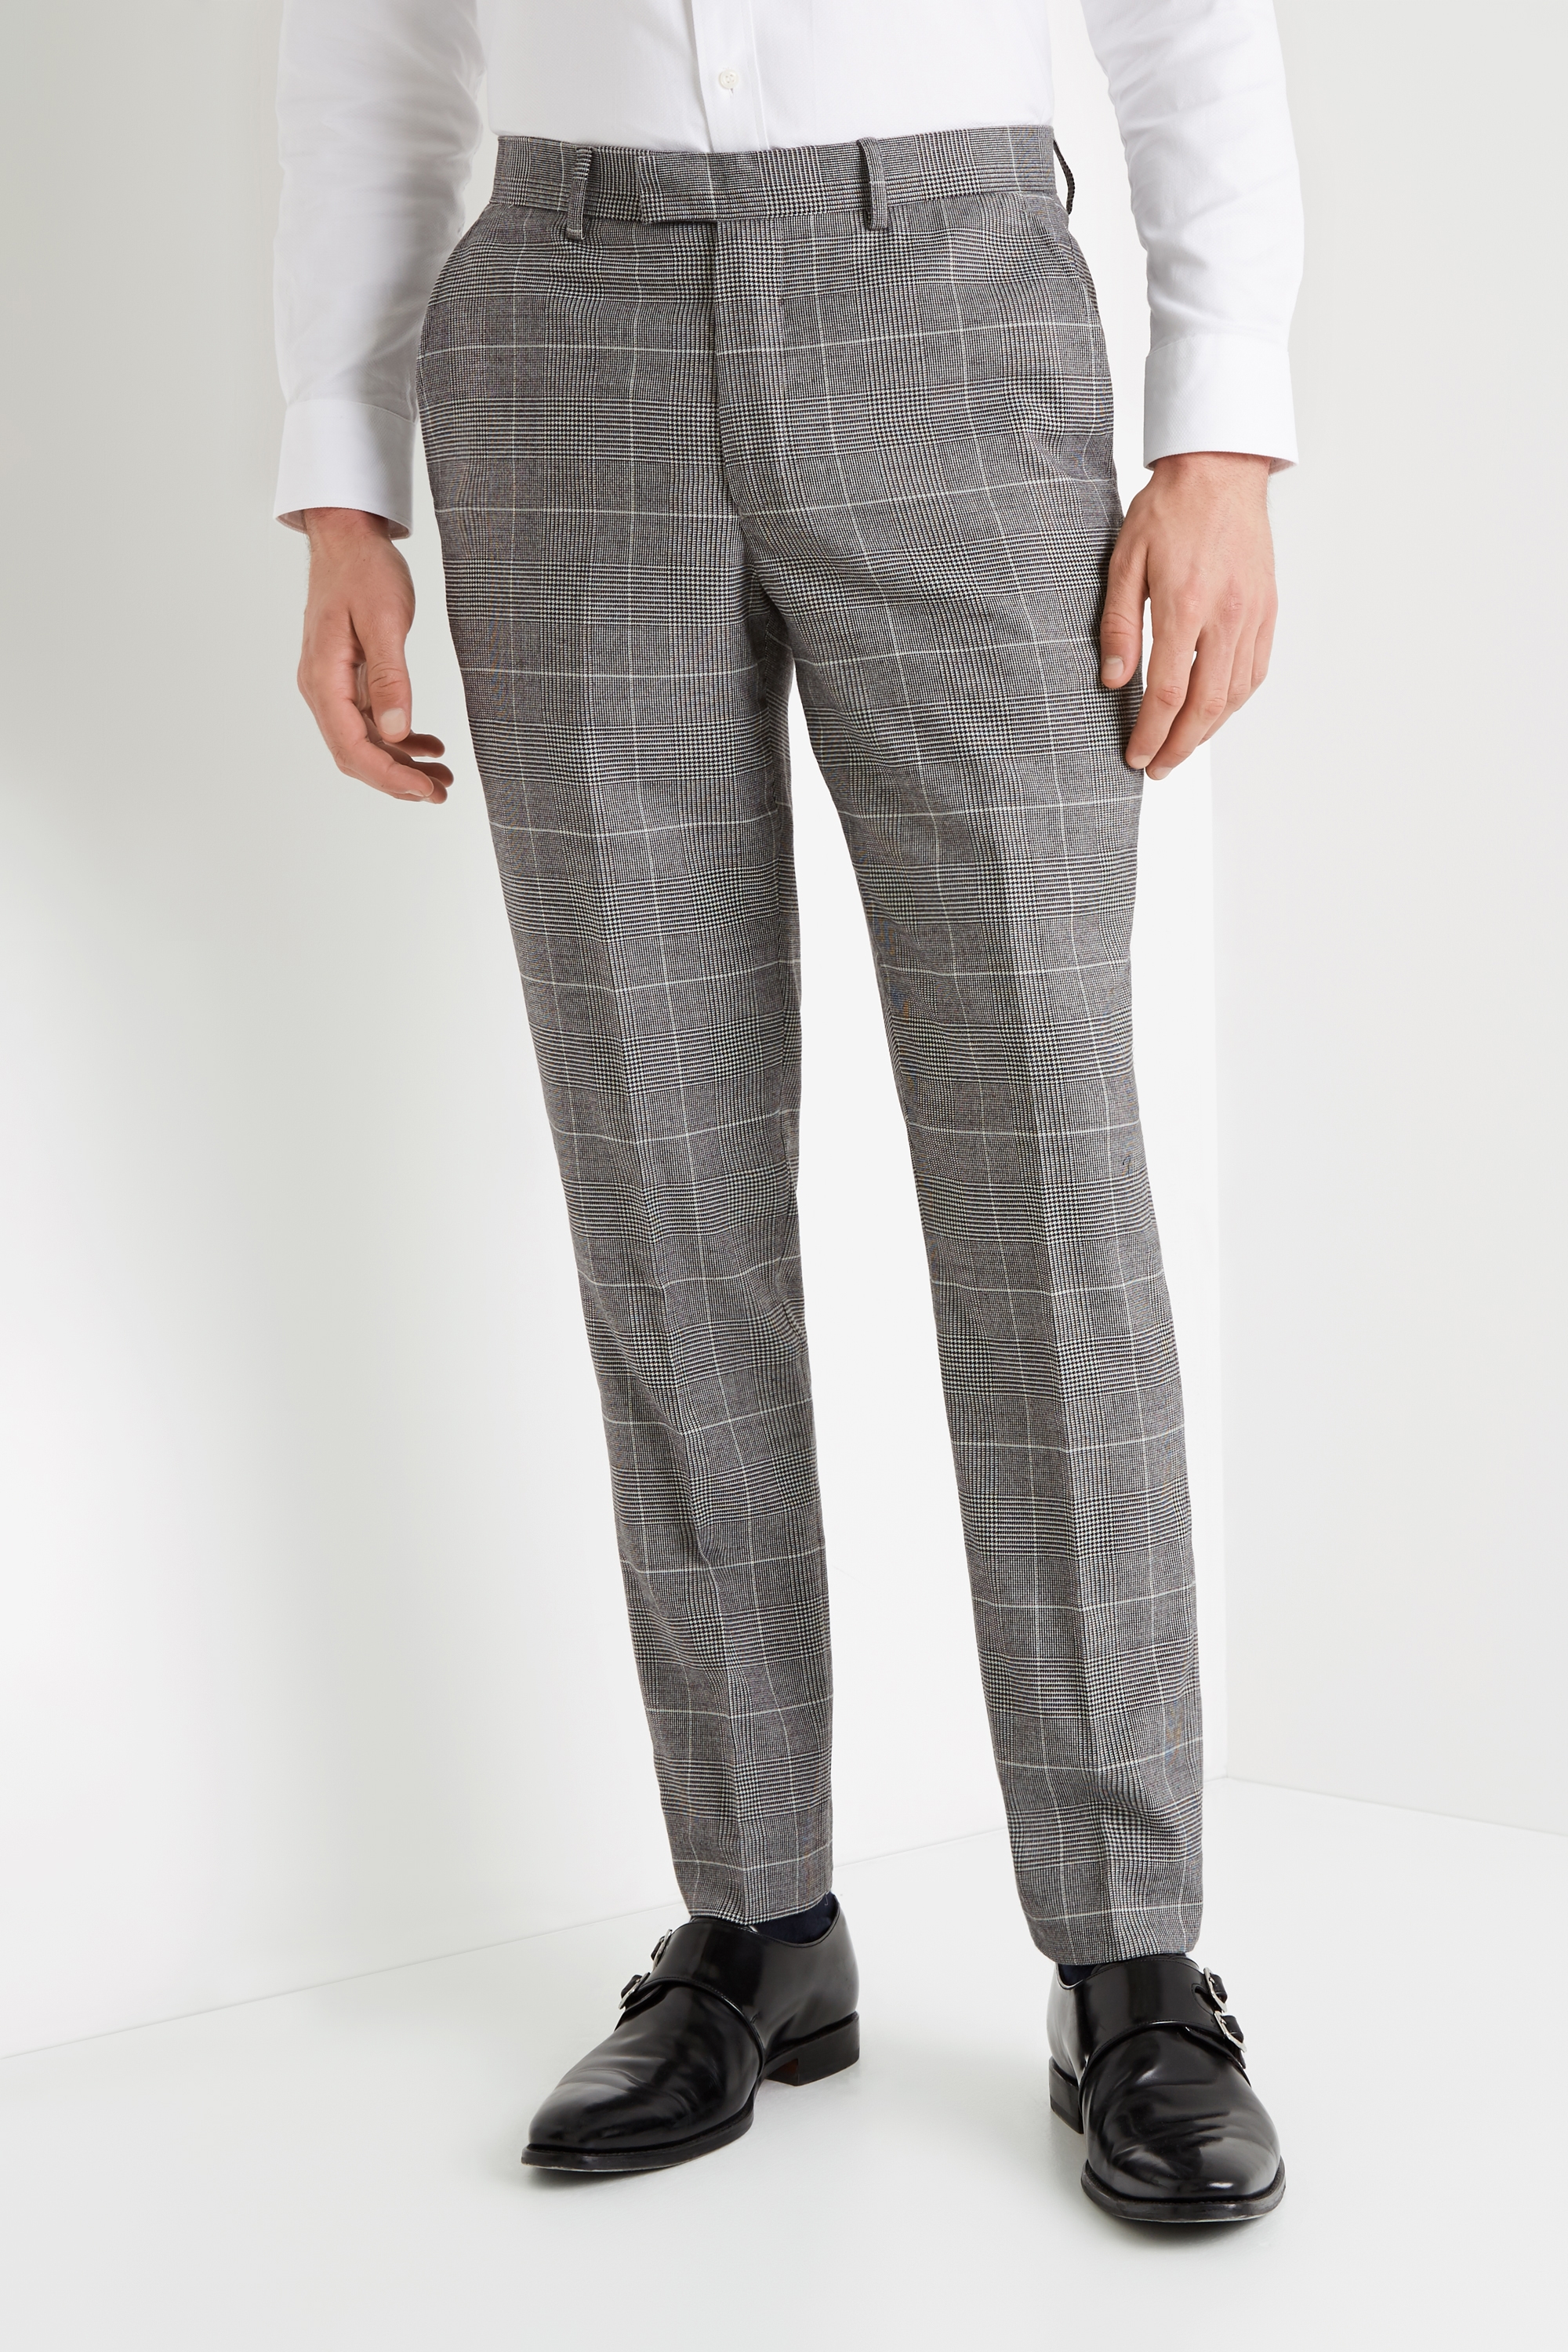 Moss 1851 Tailored Fit Black and White Check Trousers